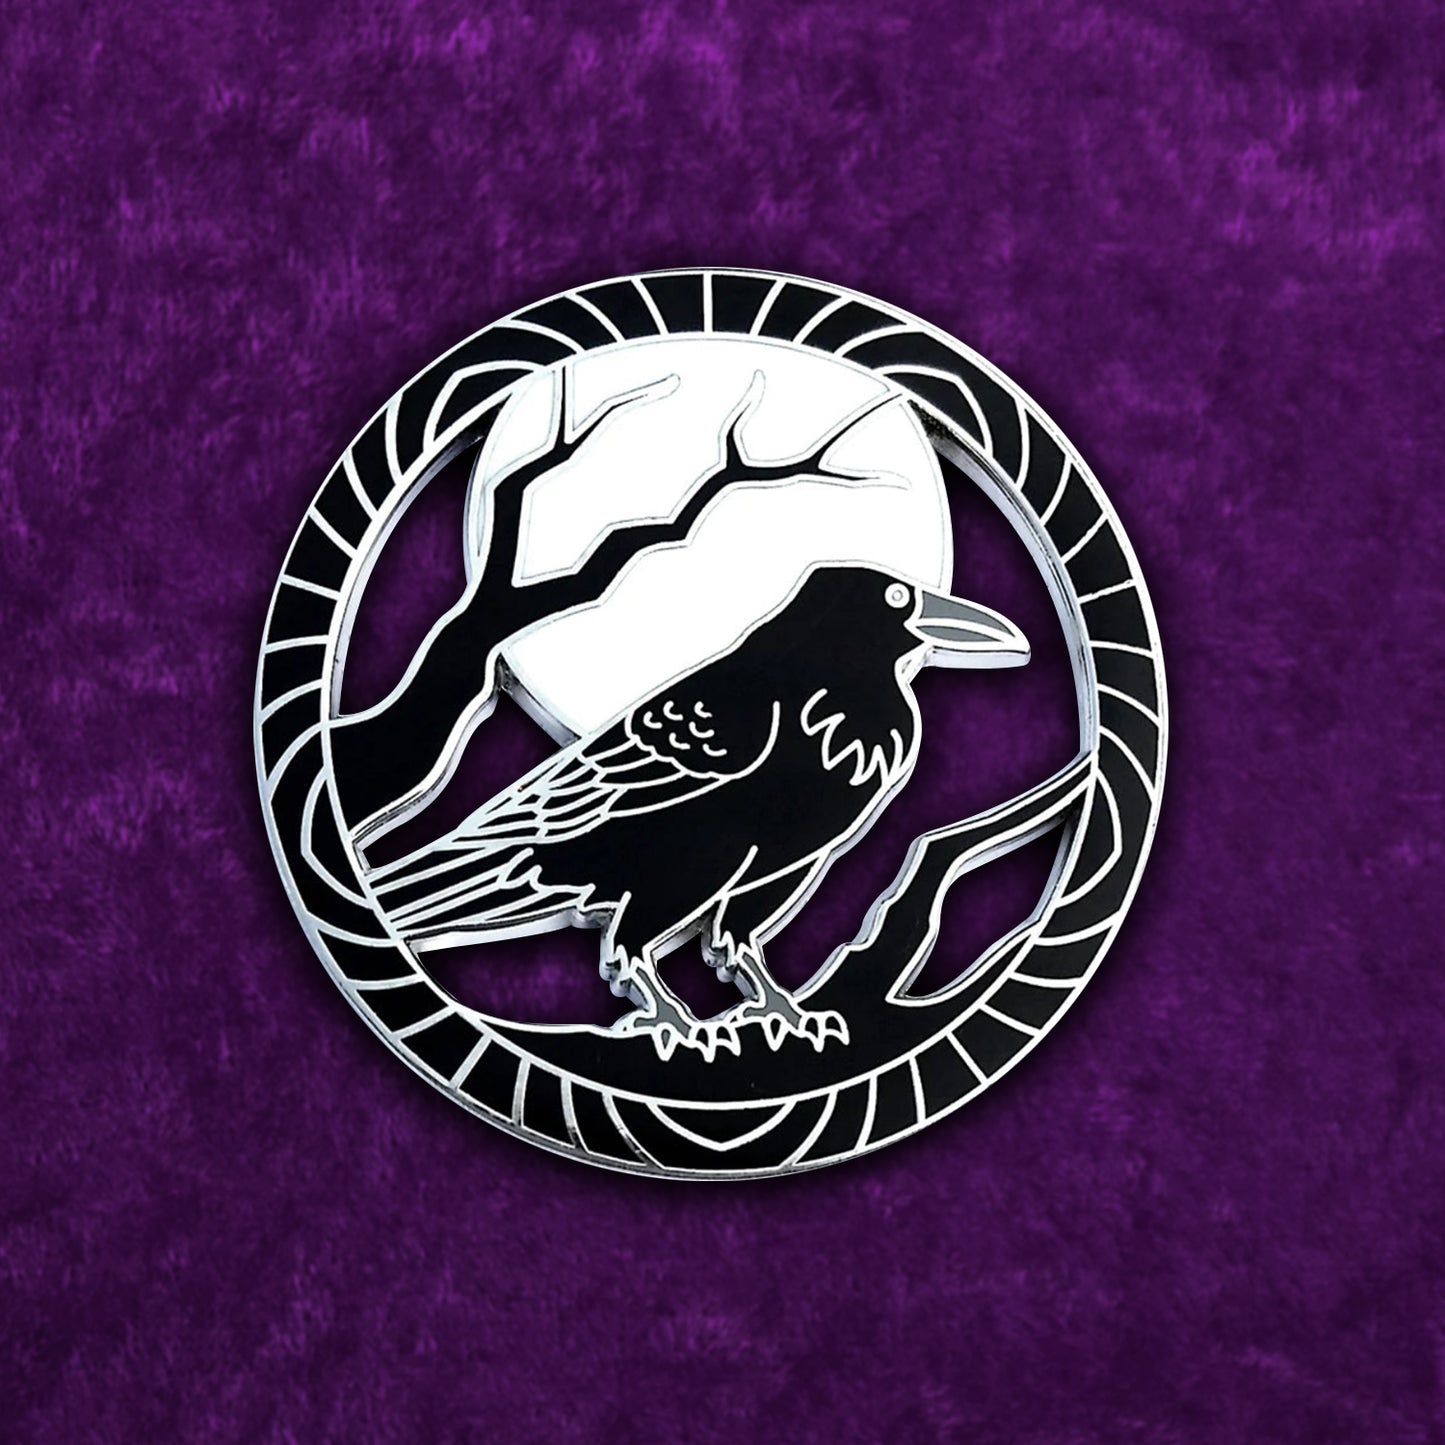 Close up view of a black and silver pin on a white background. The pin depicts a black raven perched on tree branches under a full moon, inside a circle. The pin is. set against a velvety, dark purple background.